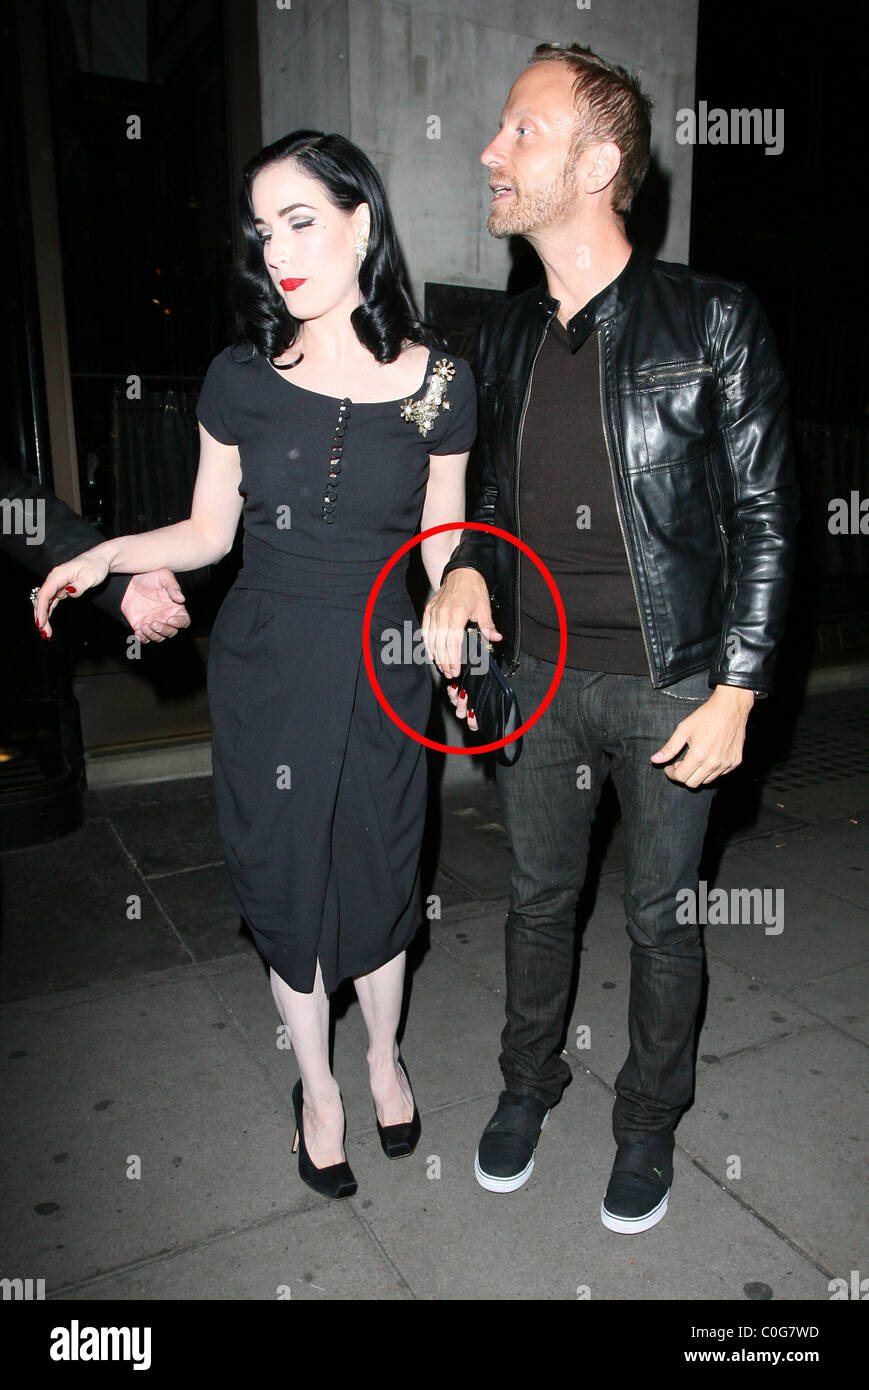 Dita Von Teese and her boyfriend leave the Wolseley restaurant together hand in hand. London, England - 12.06.08 Stock Photo